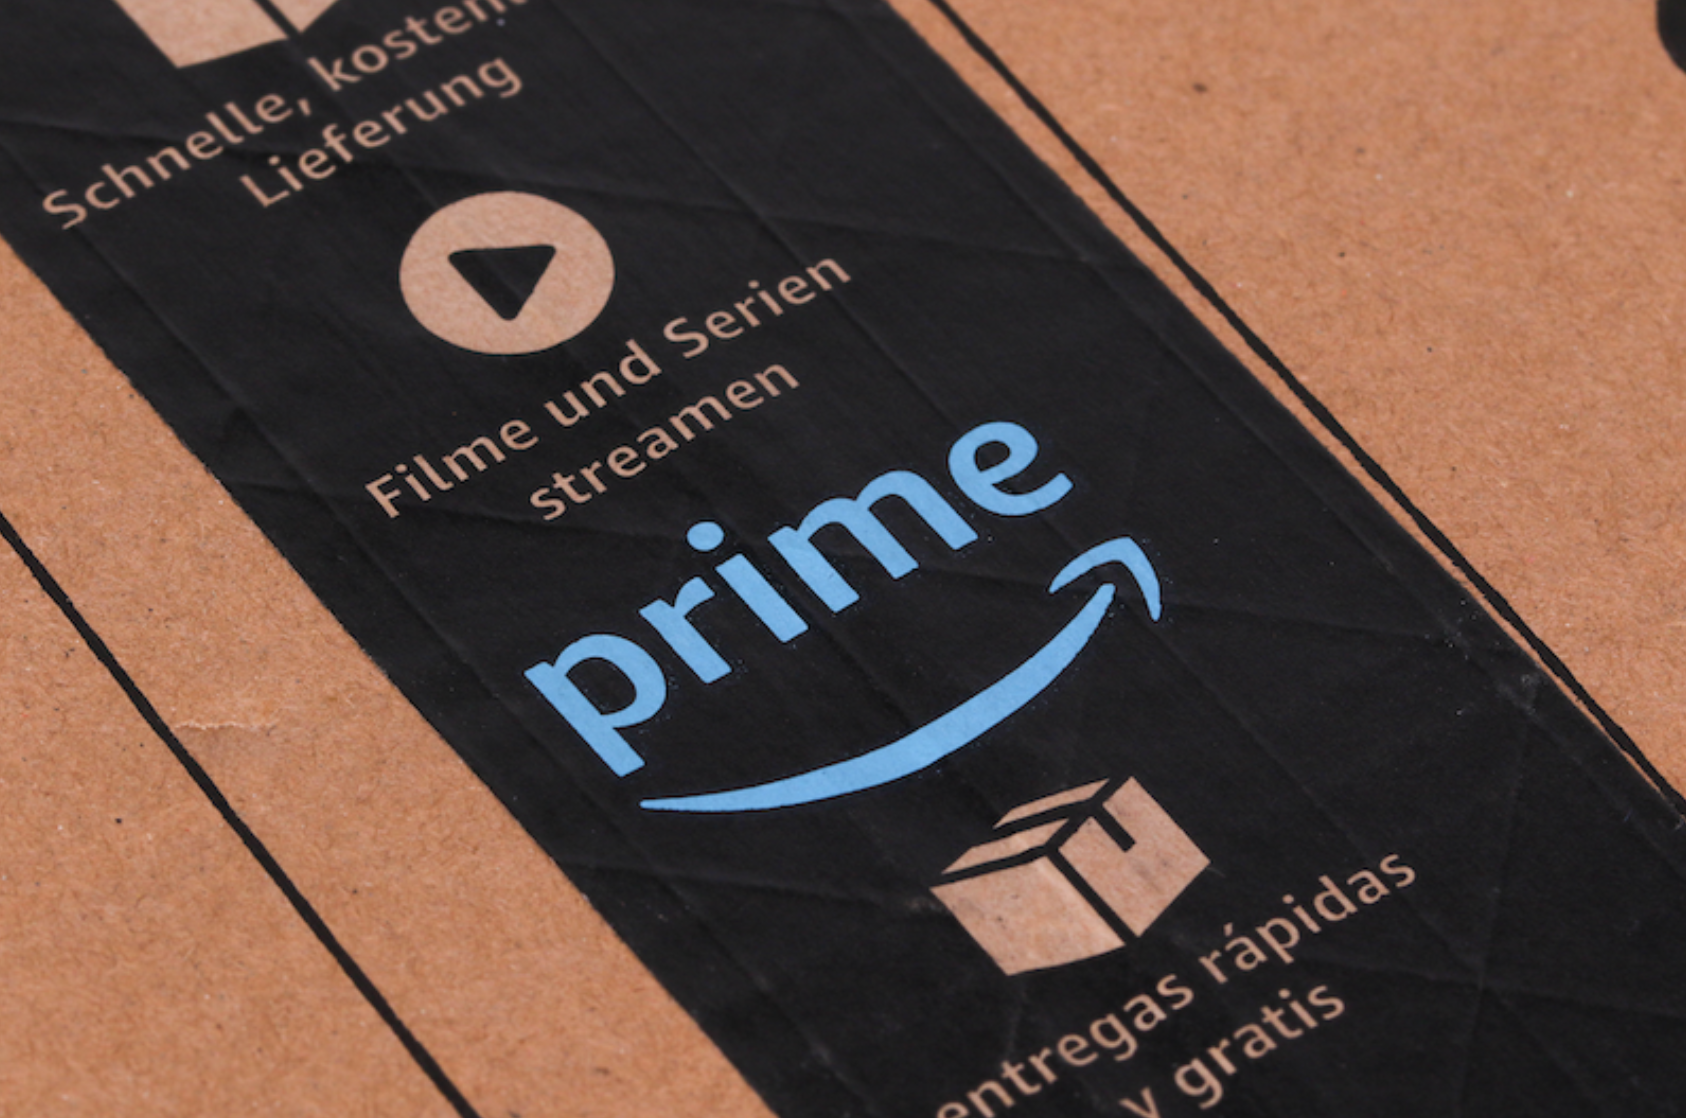 This move is part of a broader, multiyear effort by Amazon to transition its U.S. fulfillment centres to paper-based packaging solutions.